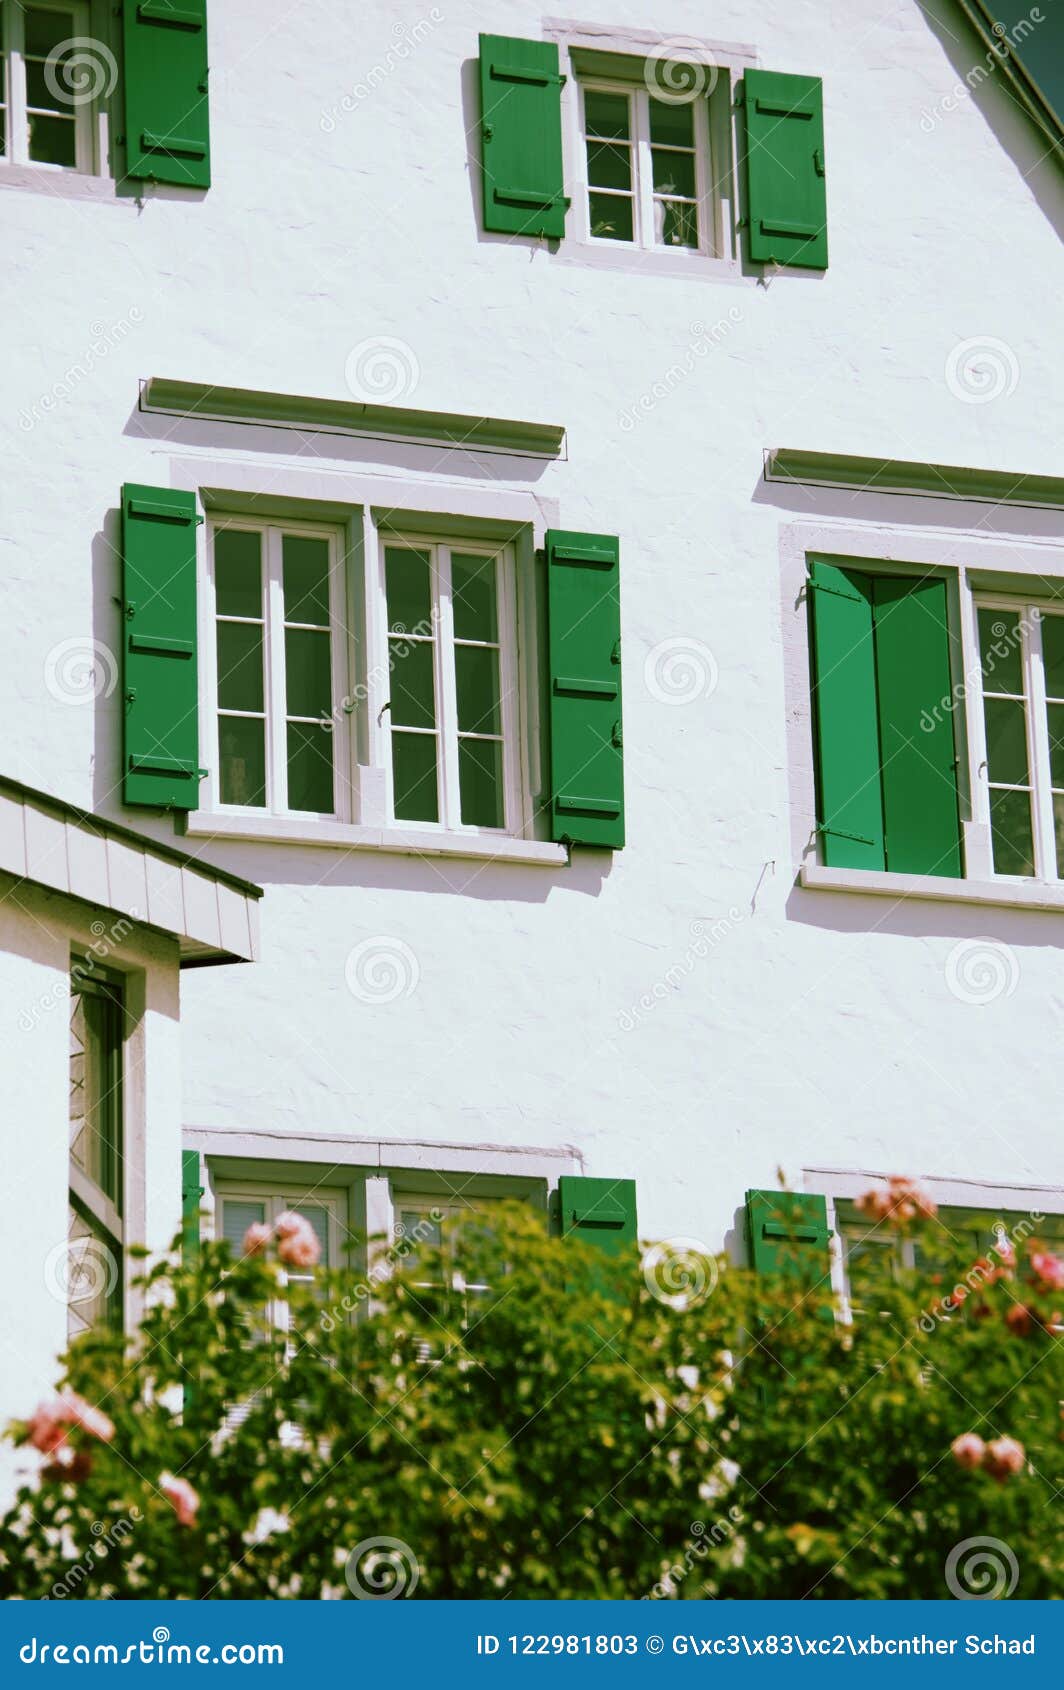 Brilliant White House Facade With Green Shutters Stock Image - Image Of  Lattice, Architecture: 122981803